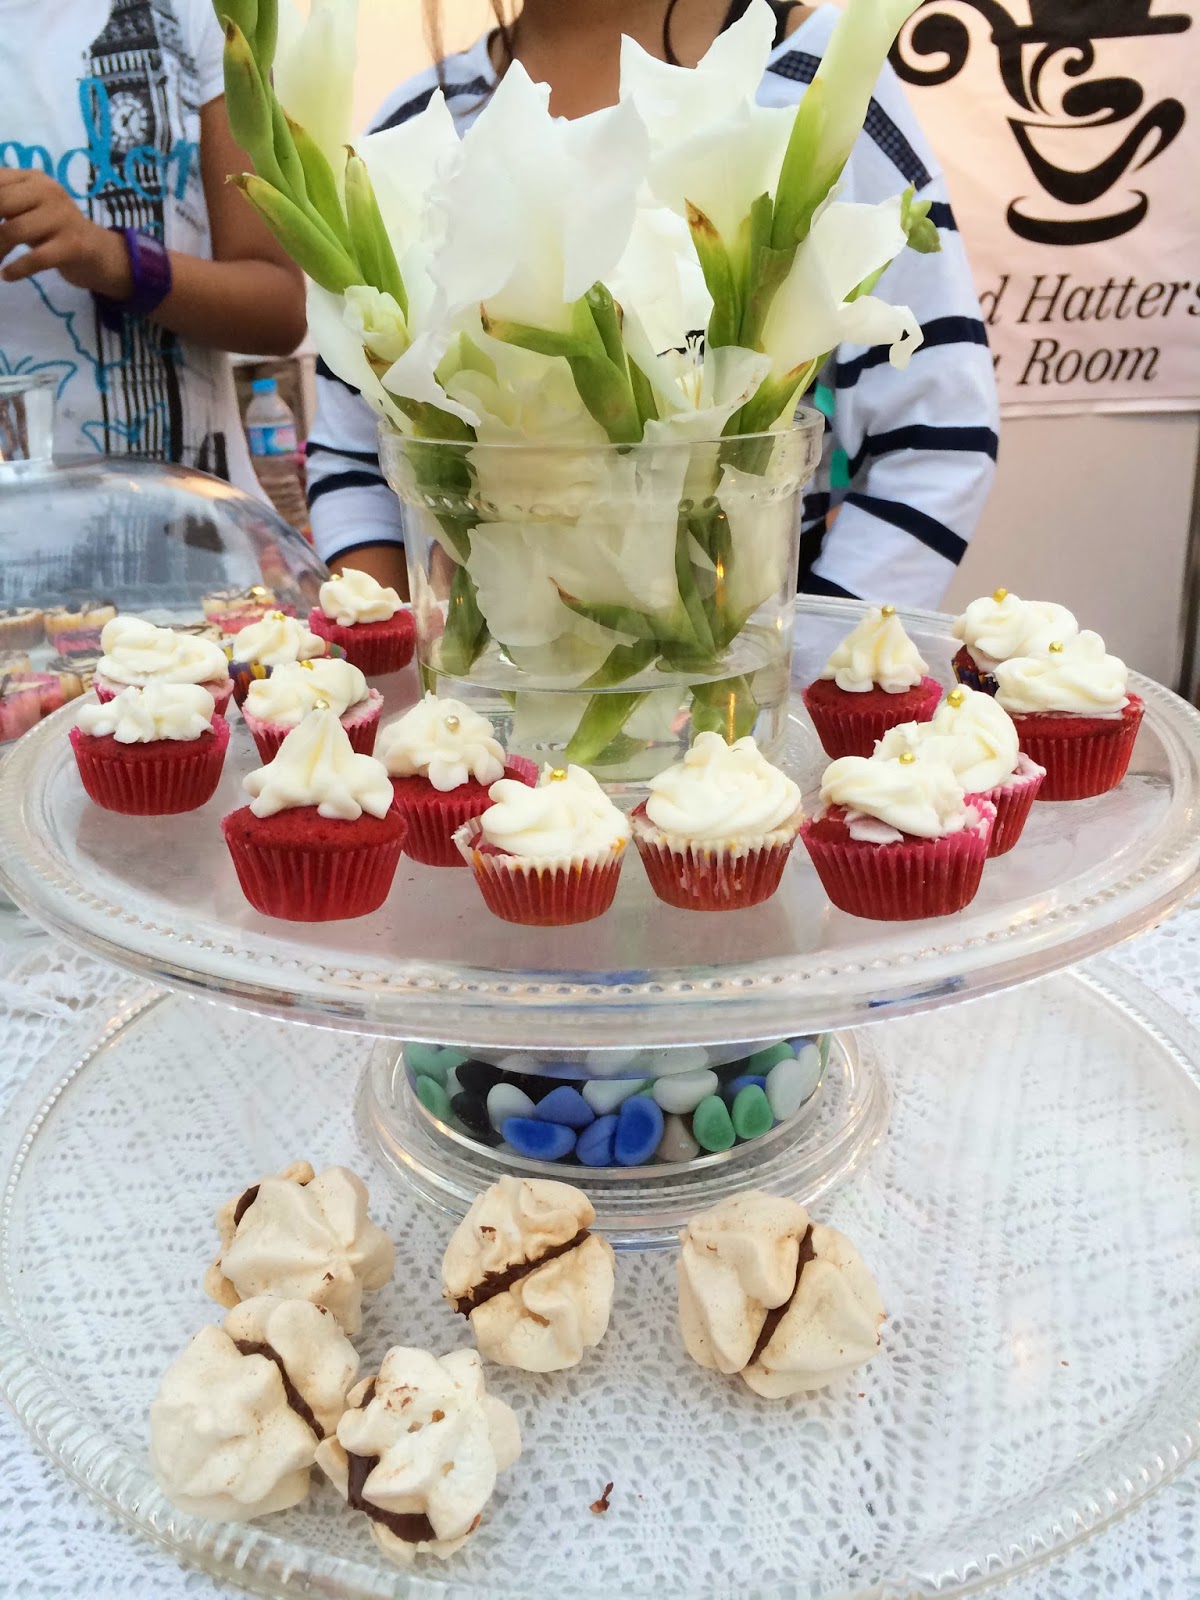 Karachi Eat Food Festival - cupcakes and Meringue kisses by The Mad Hatter's Tearoom